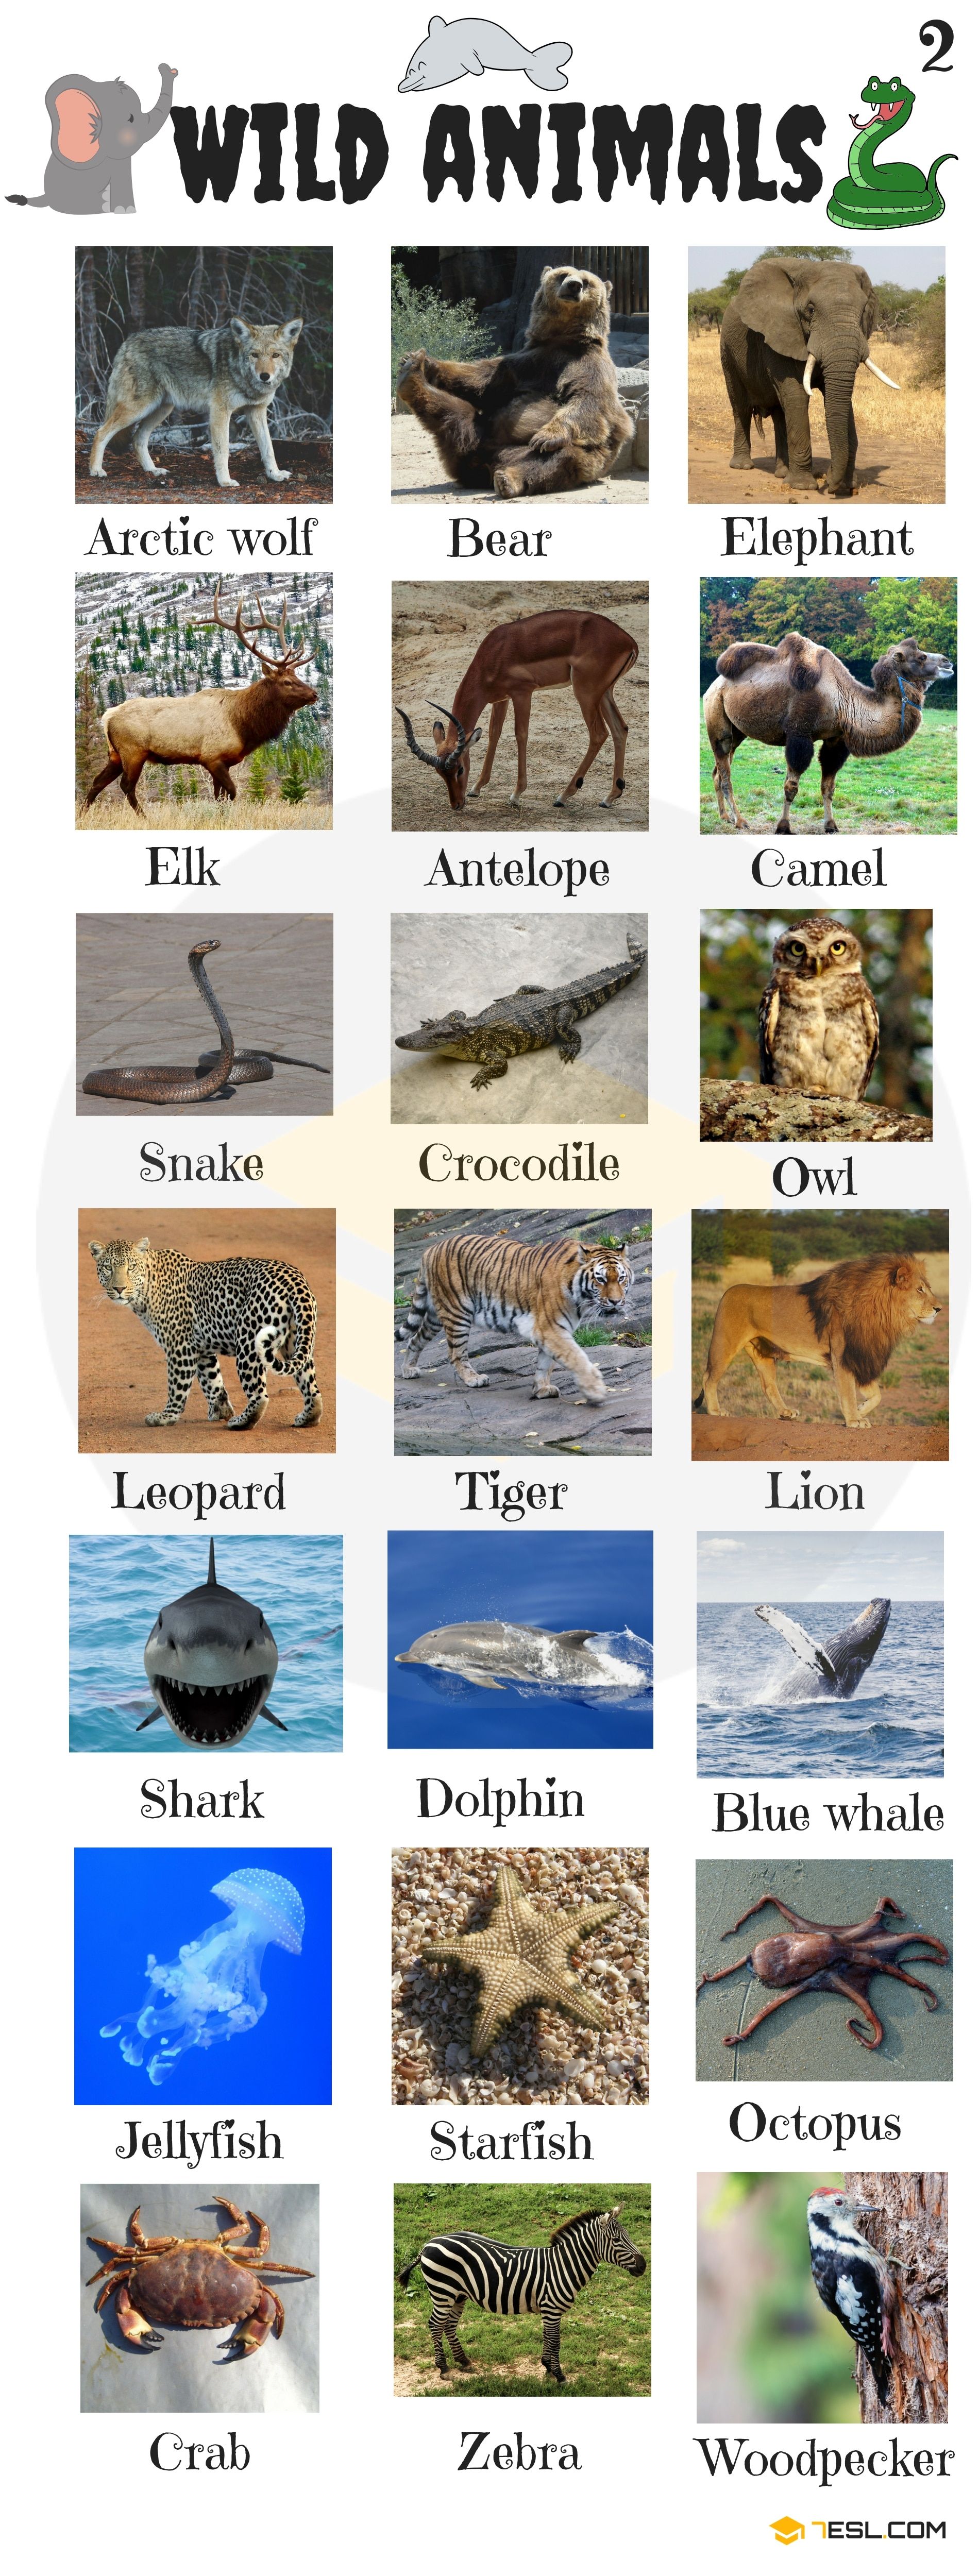 What are the different types of animal names?